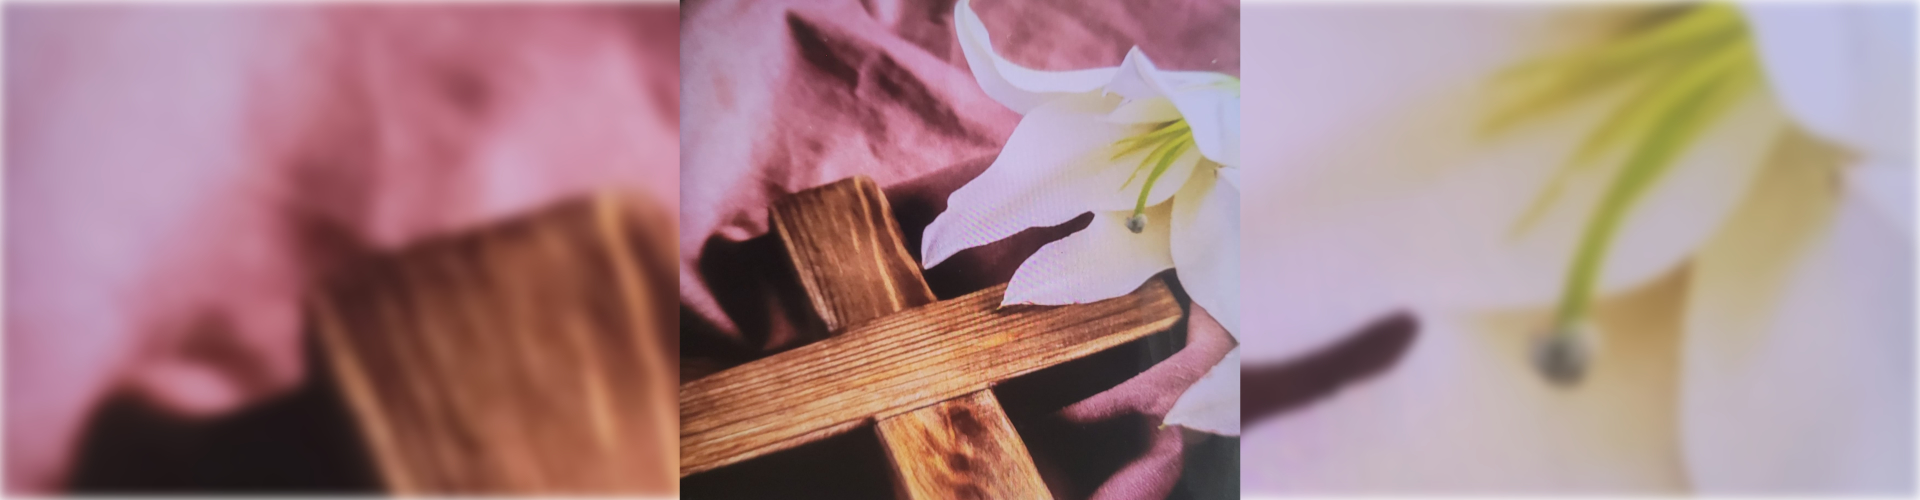 orchid and cross on a sheet